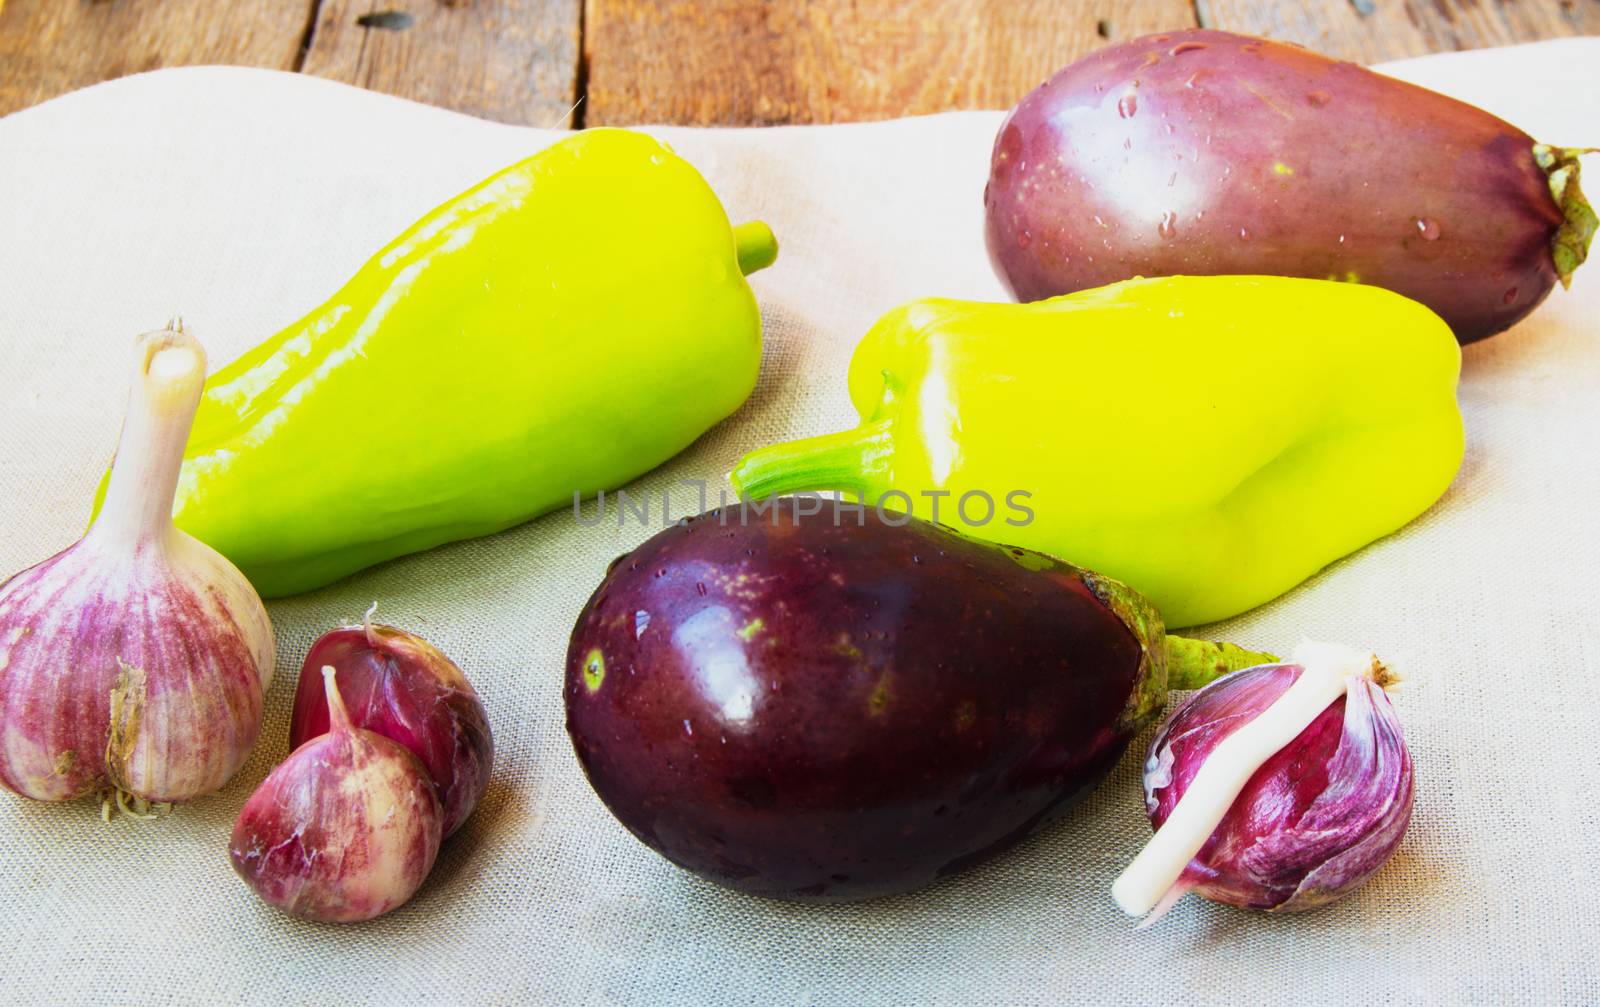 Raw eggplant, garlic, bell peppers, healthy eating and diet concept on the old wooden background by claire_lucia